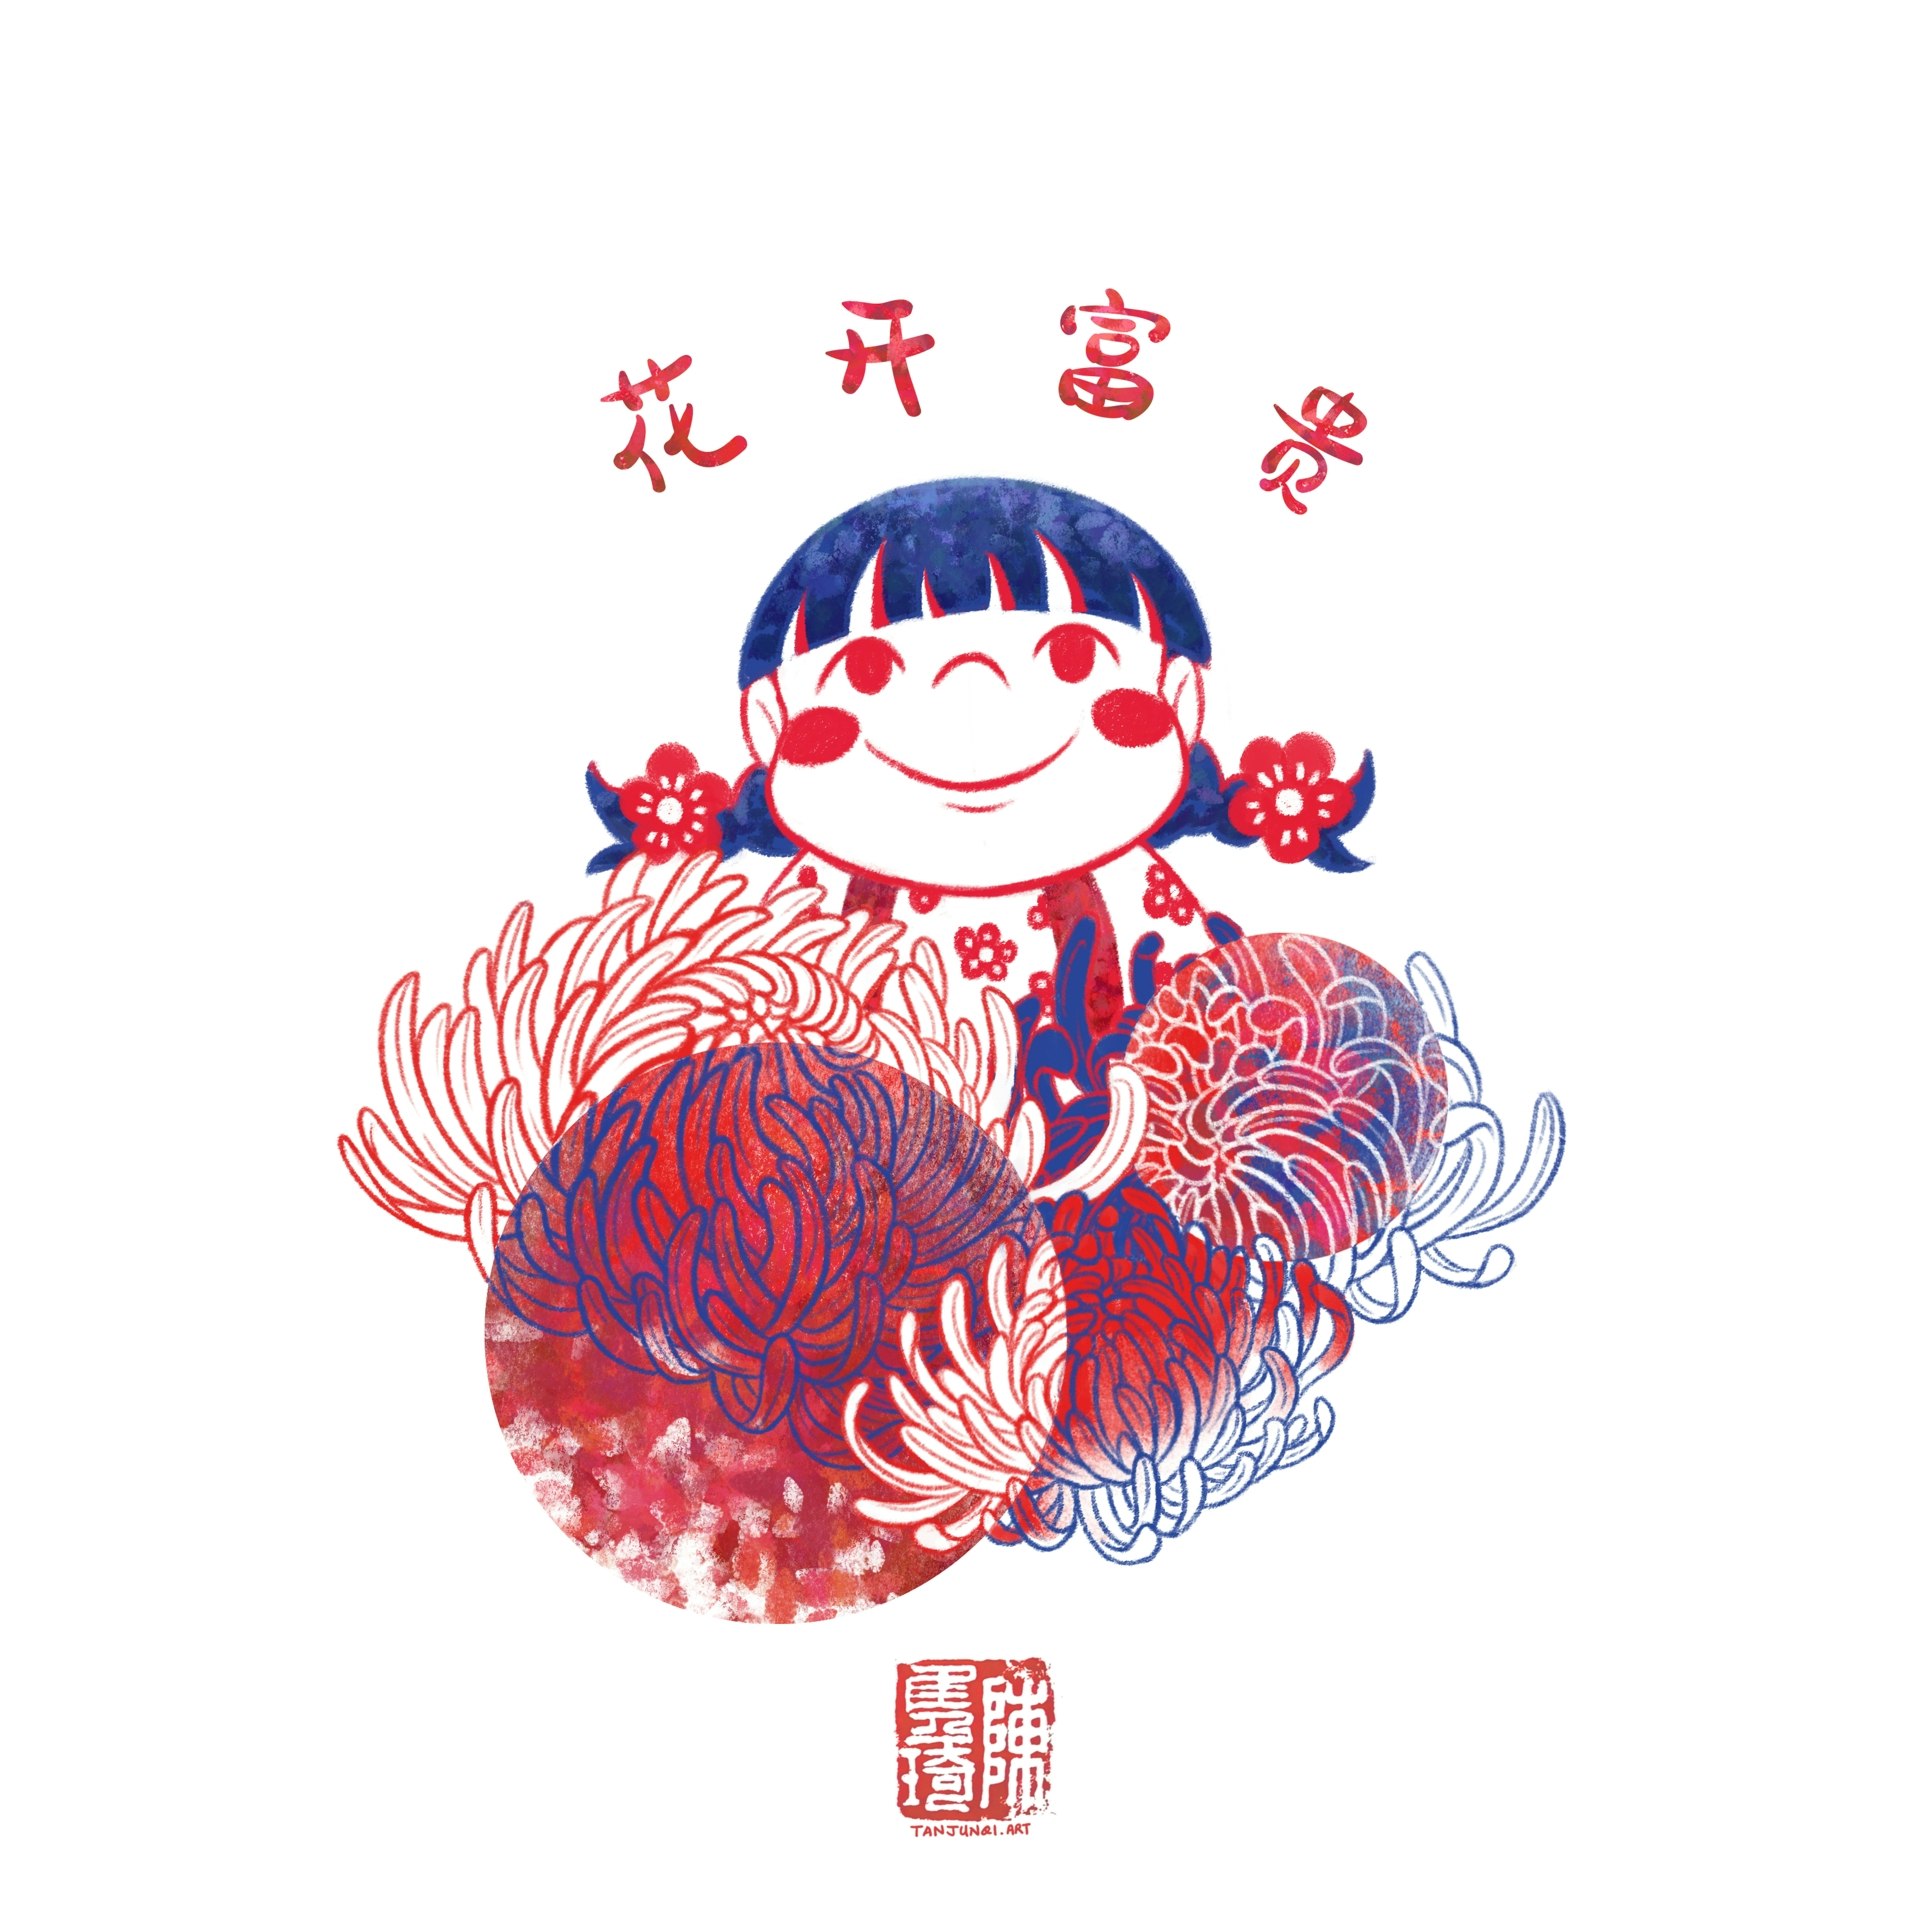 Digital illustration showing a young girl with pigtails, Shan Shan, emerging from a few chrysanthemum blooms, with an auspicious chinese phrase above her. The color scheme is red/burgundy and navy blue on white with subtle texture on the color flats.